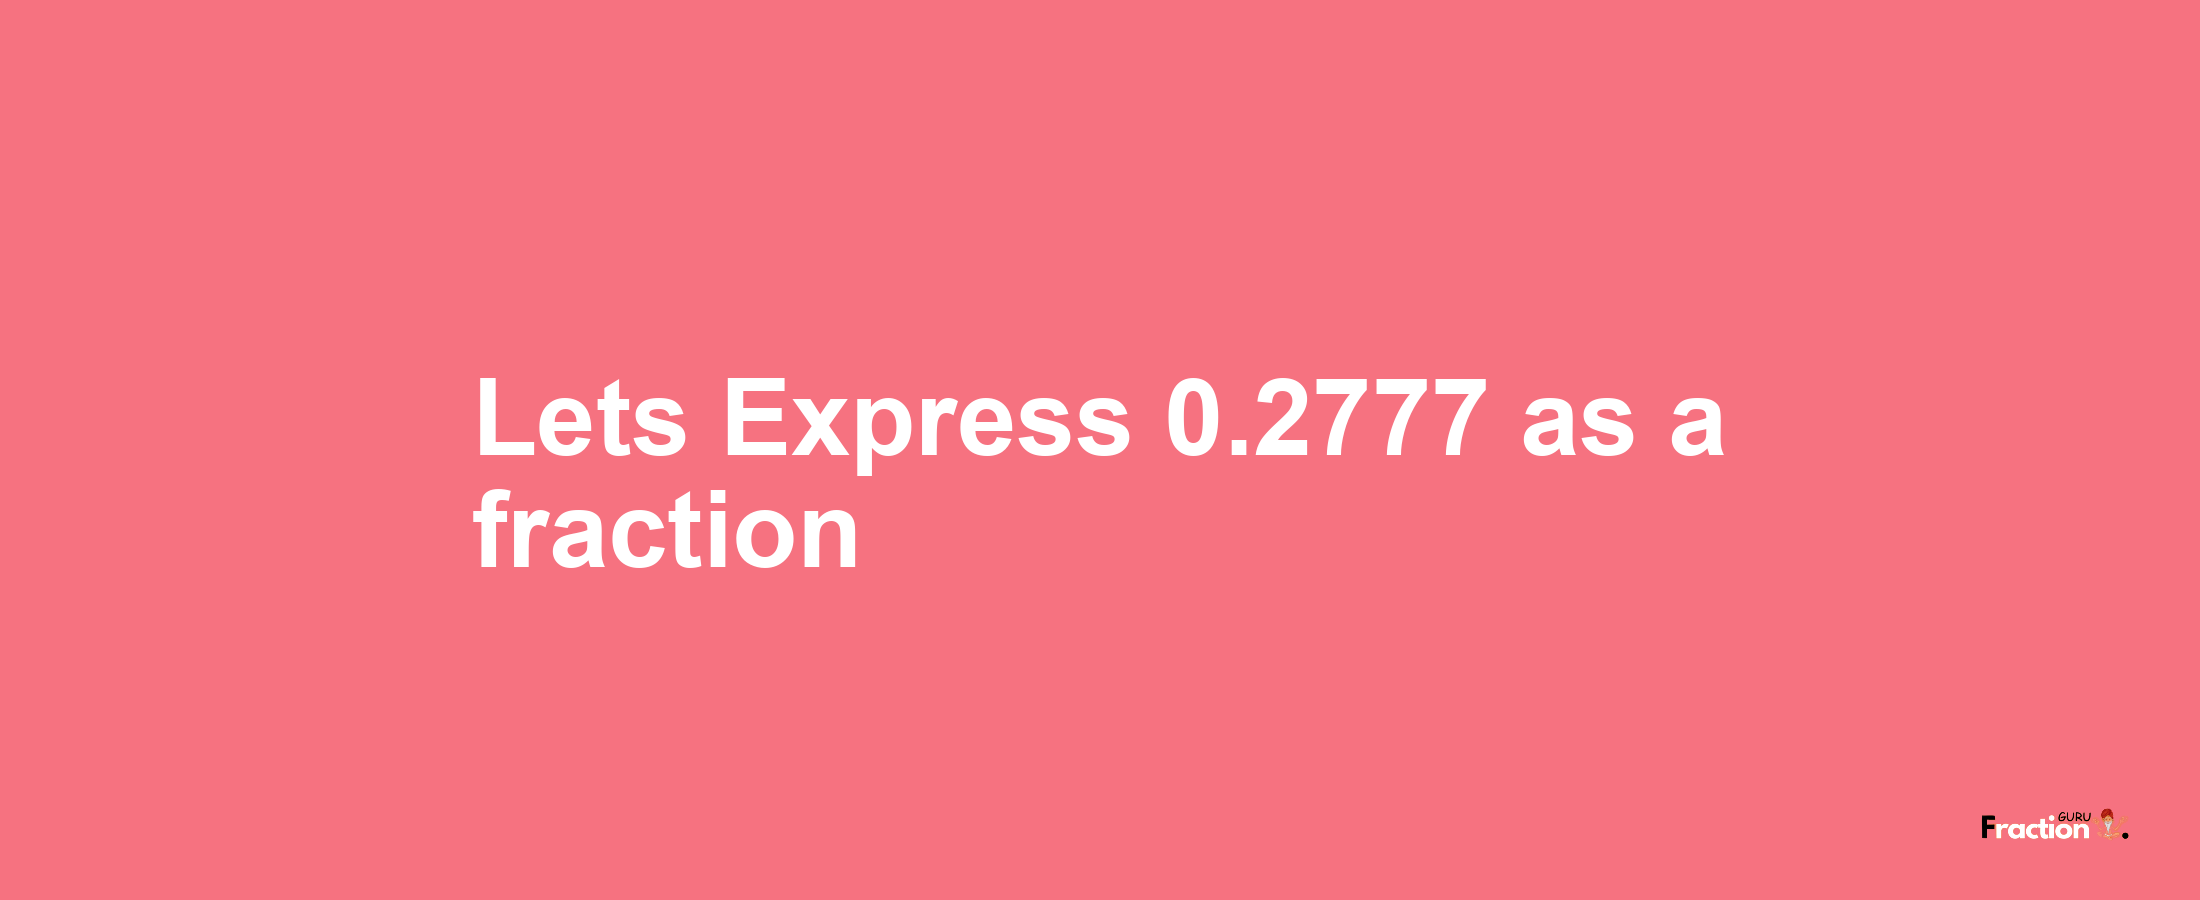 Lets Express 0.2777 as afraction